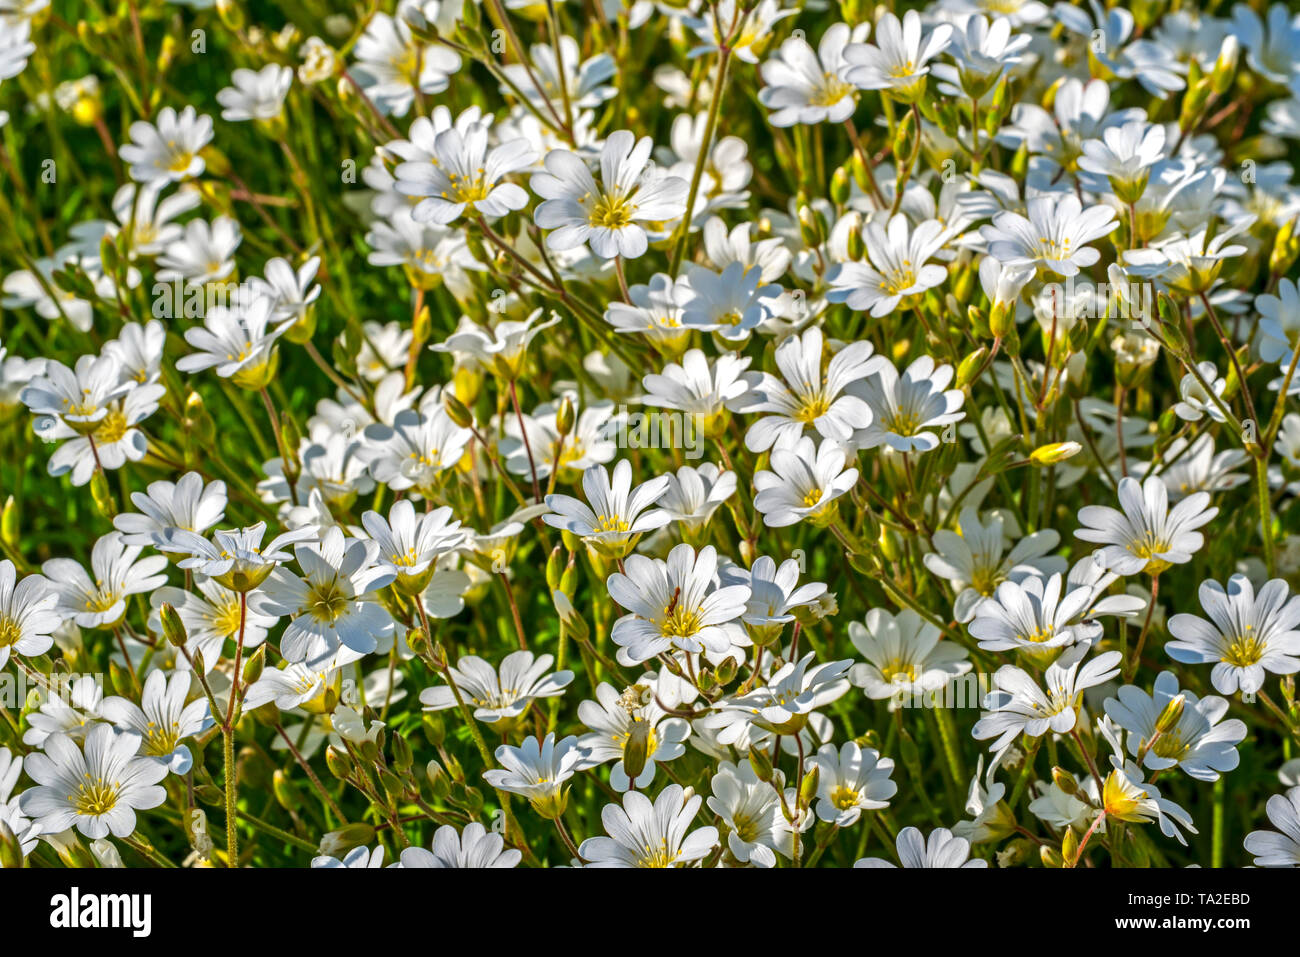 Field mouse-ear / field chickweed (Cerastium arvense) in flower, native to Europe and North America Stock Photo